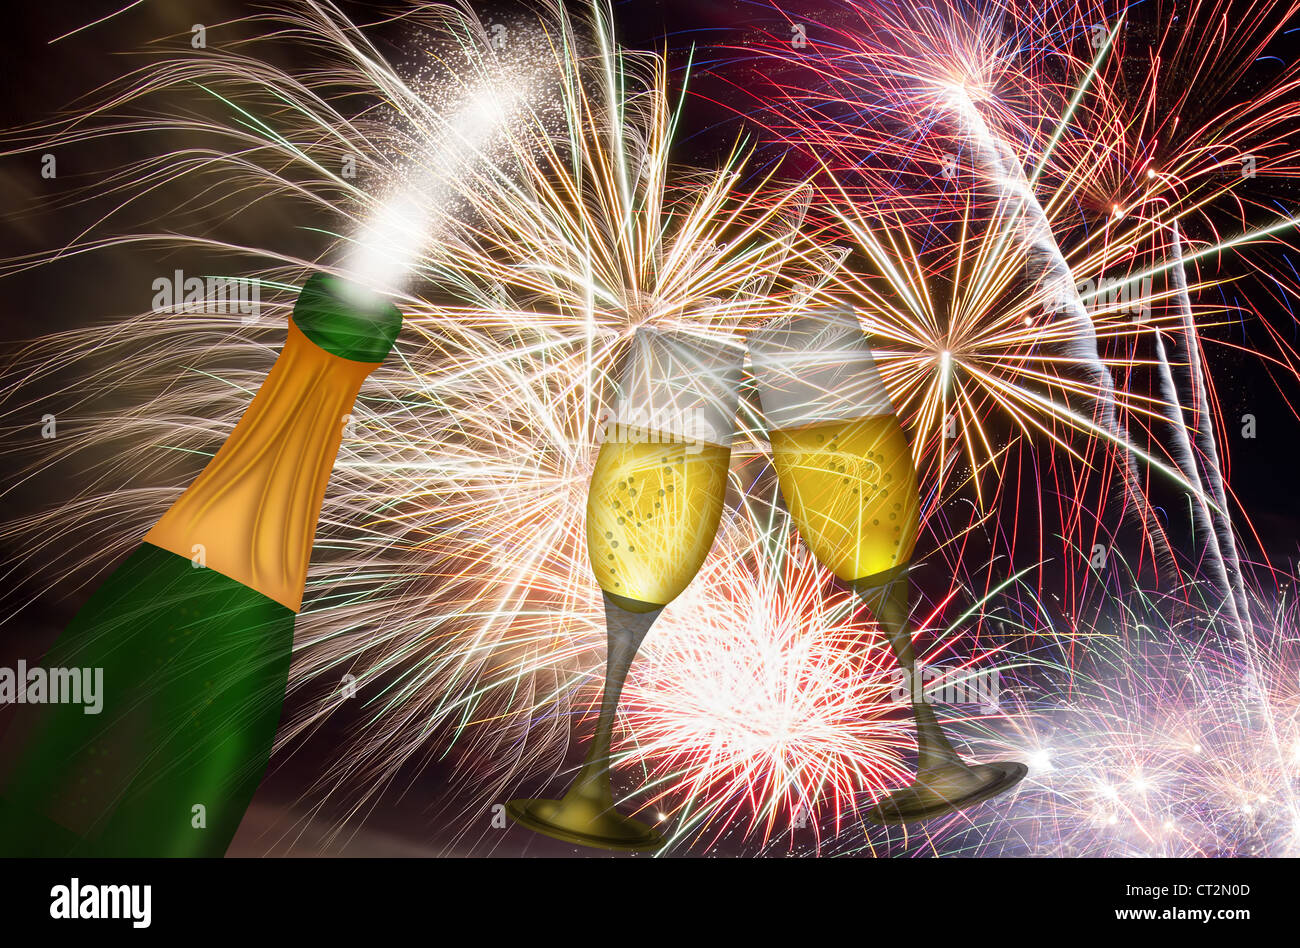 Champagne Bottle and Two Flutes Toasting with Fireworks Background Stock Photo